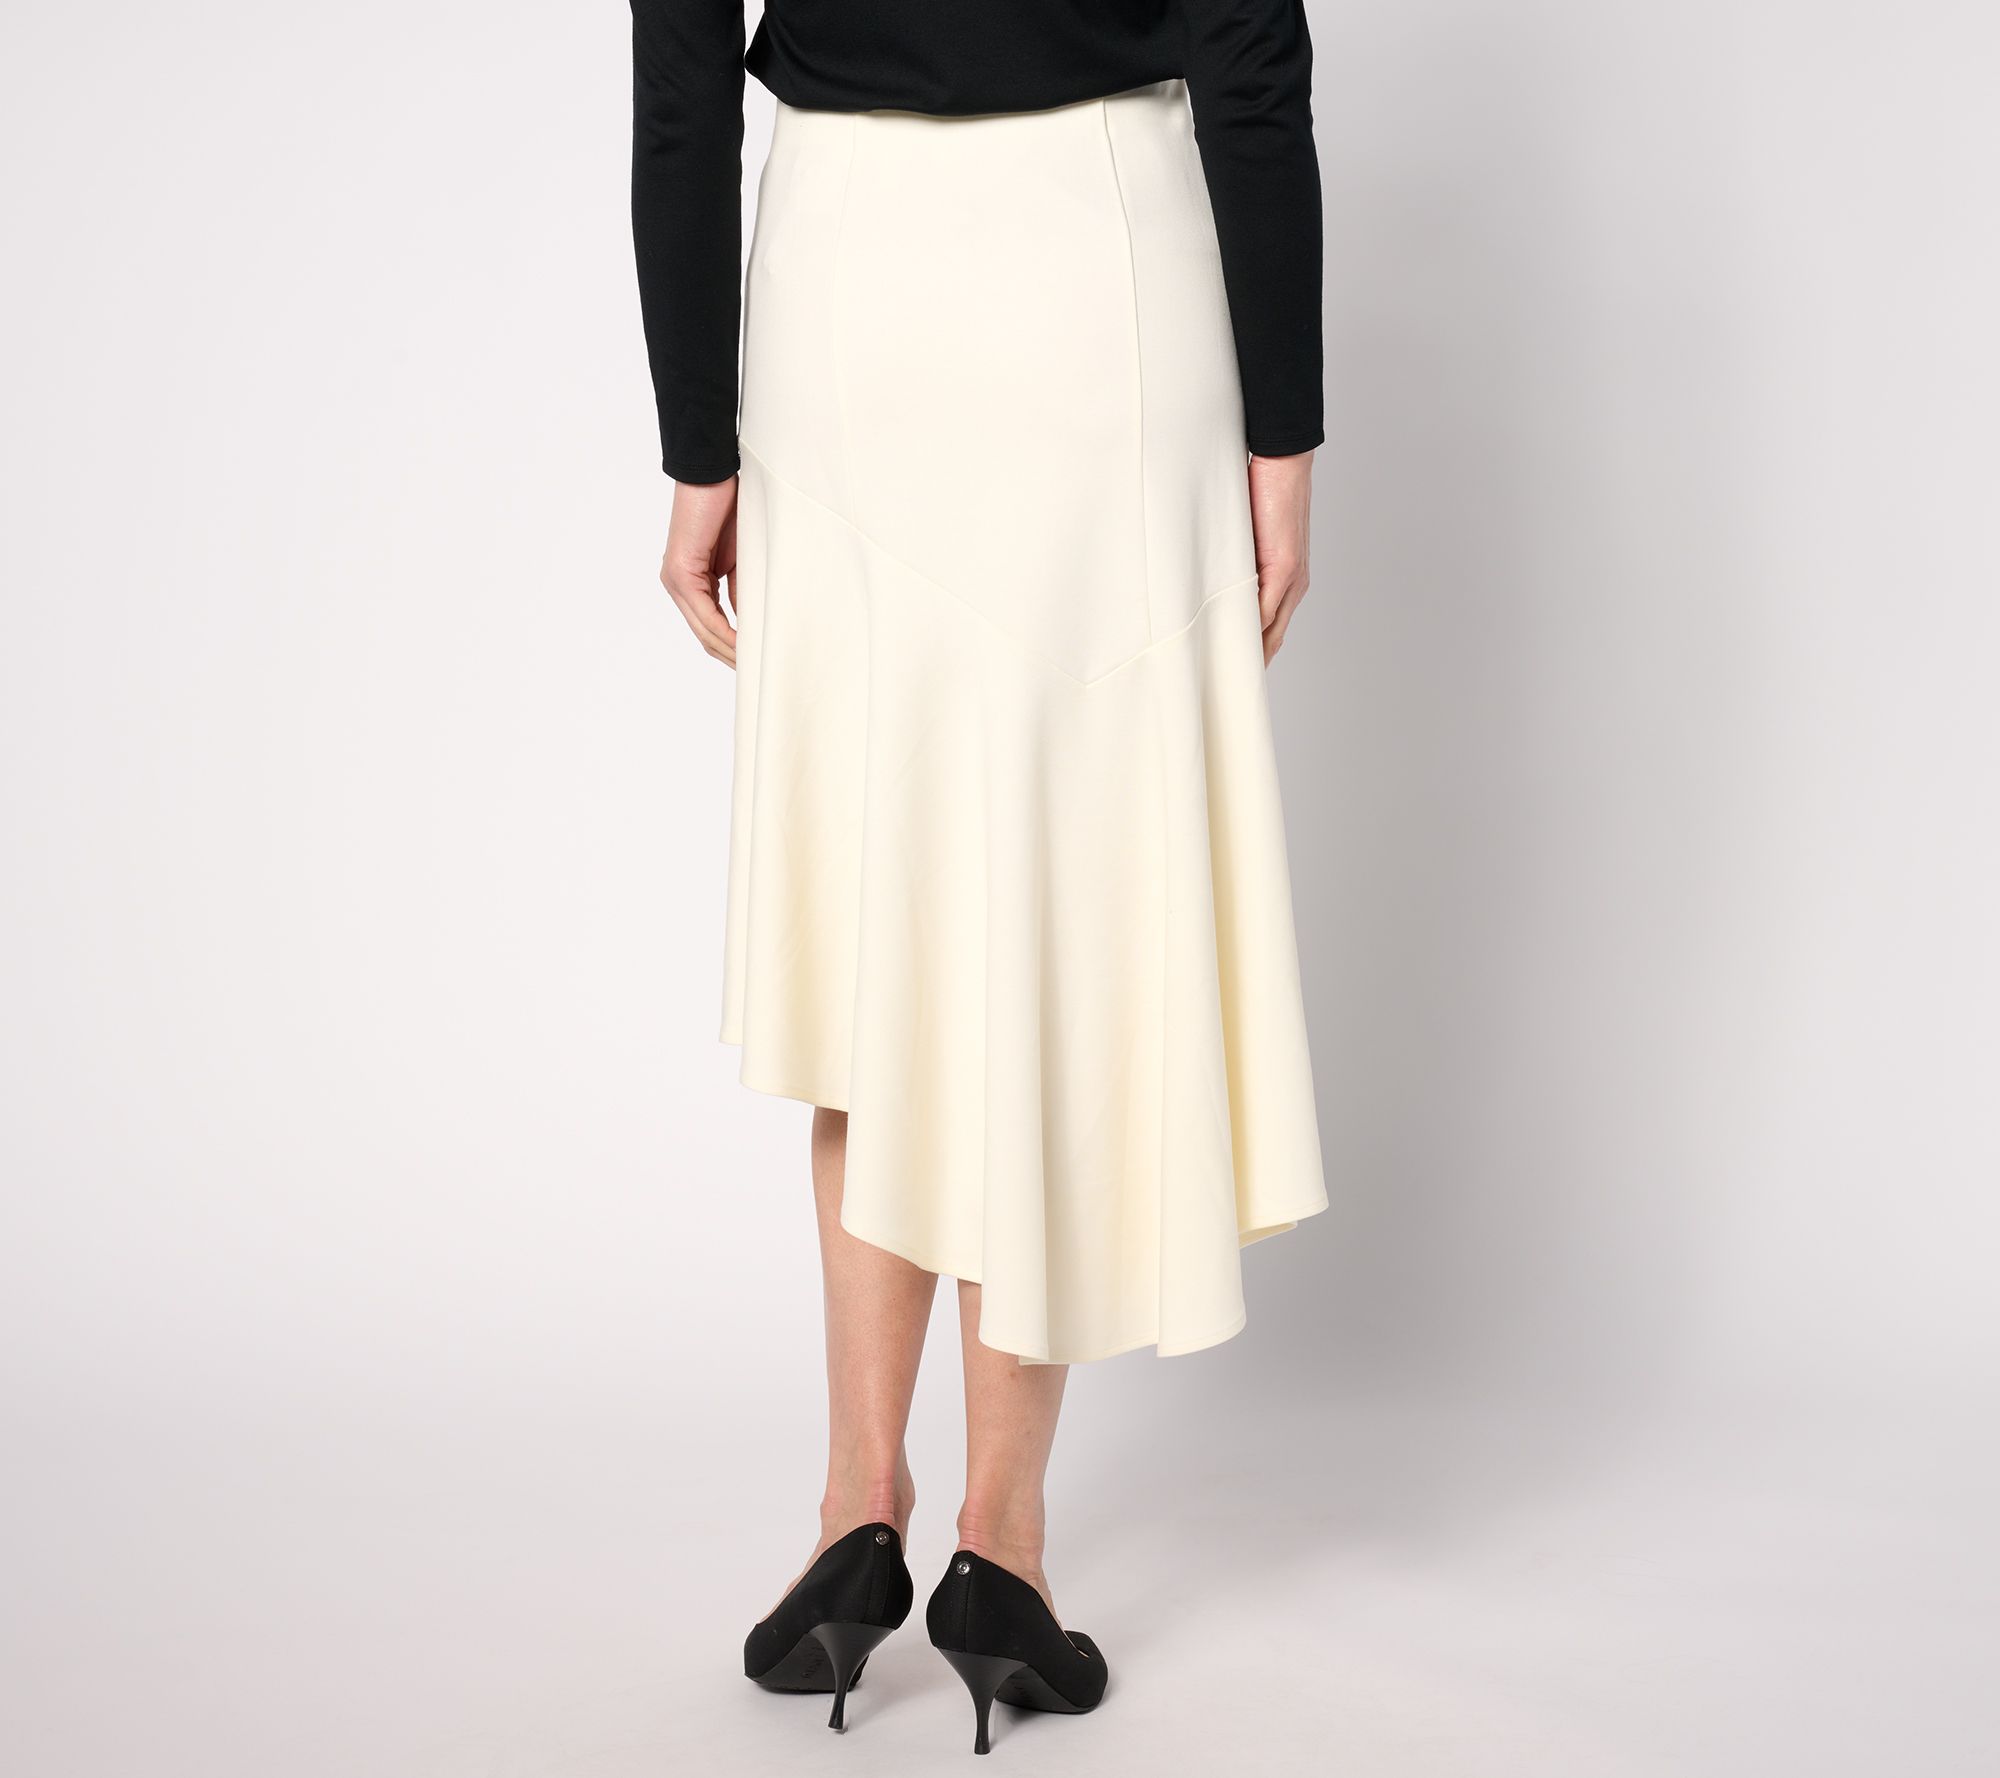 BEAUTIFUL by Lawrence Zarian Petite Silky Ponte Pull-On Skirt - QVC.com